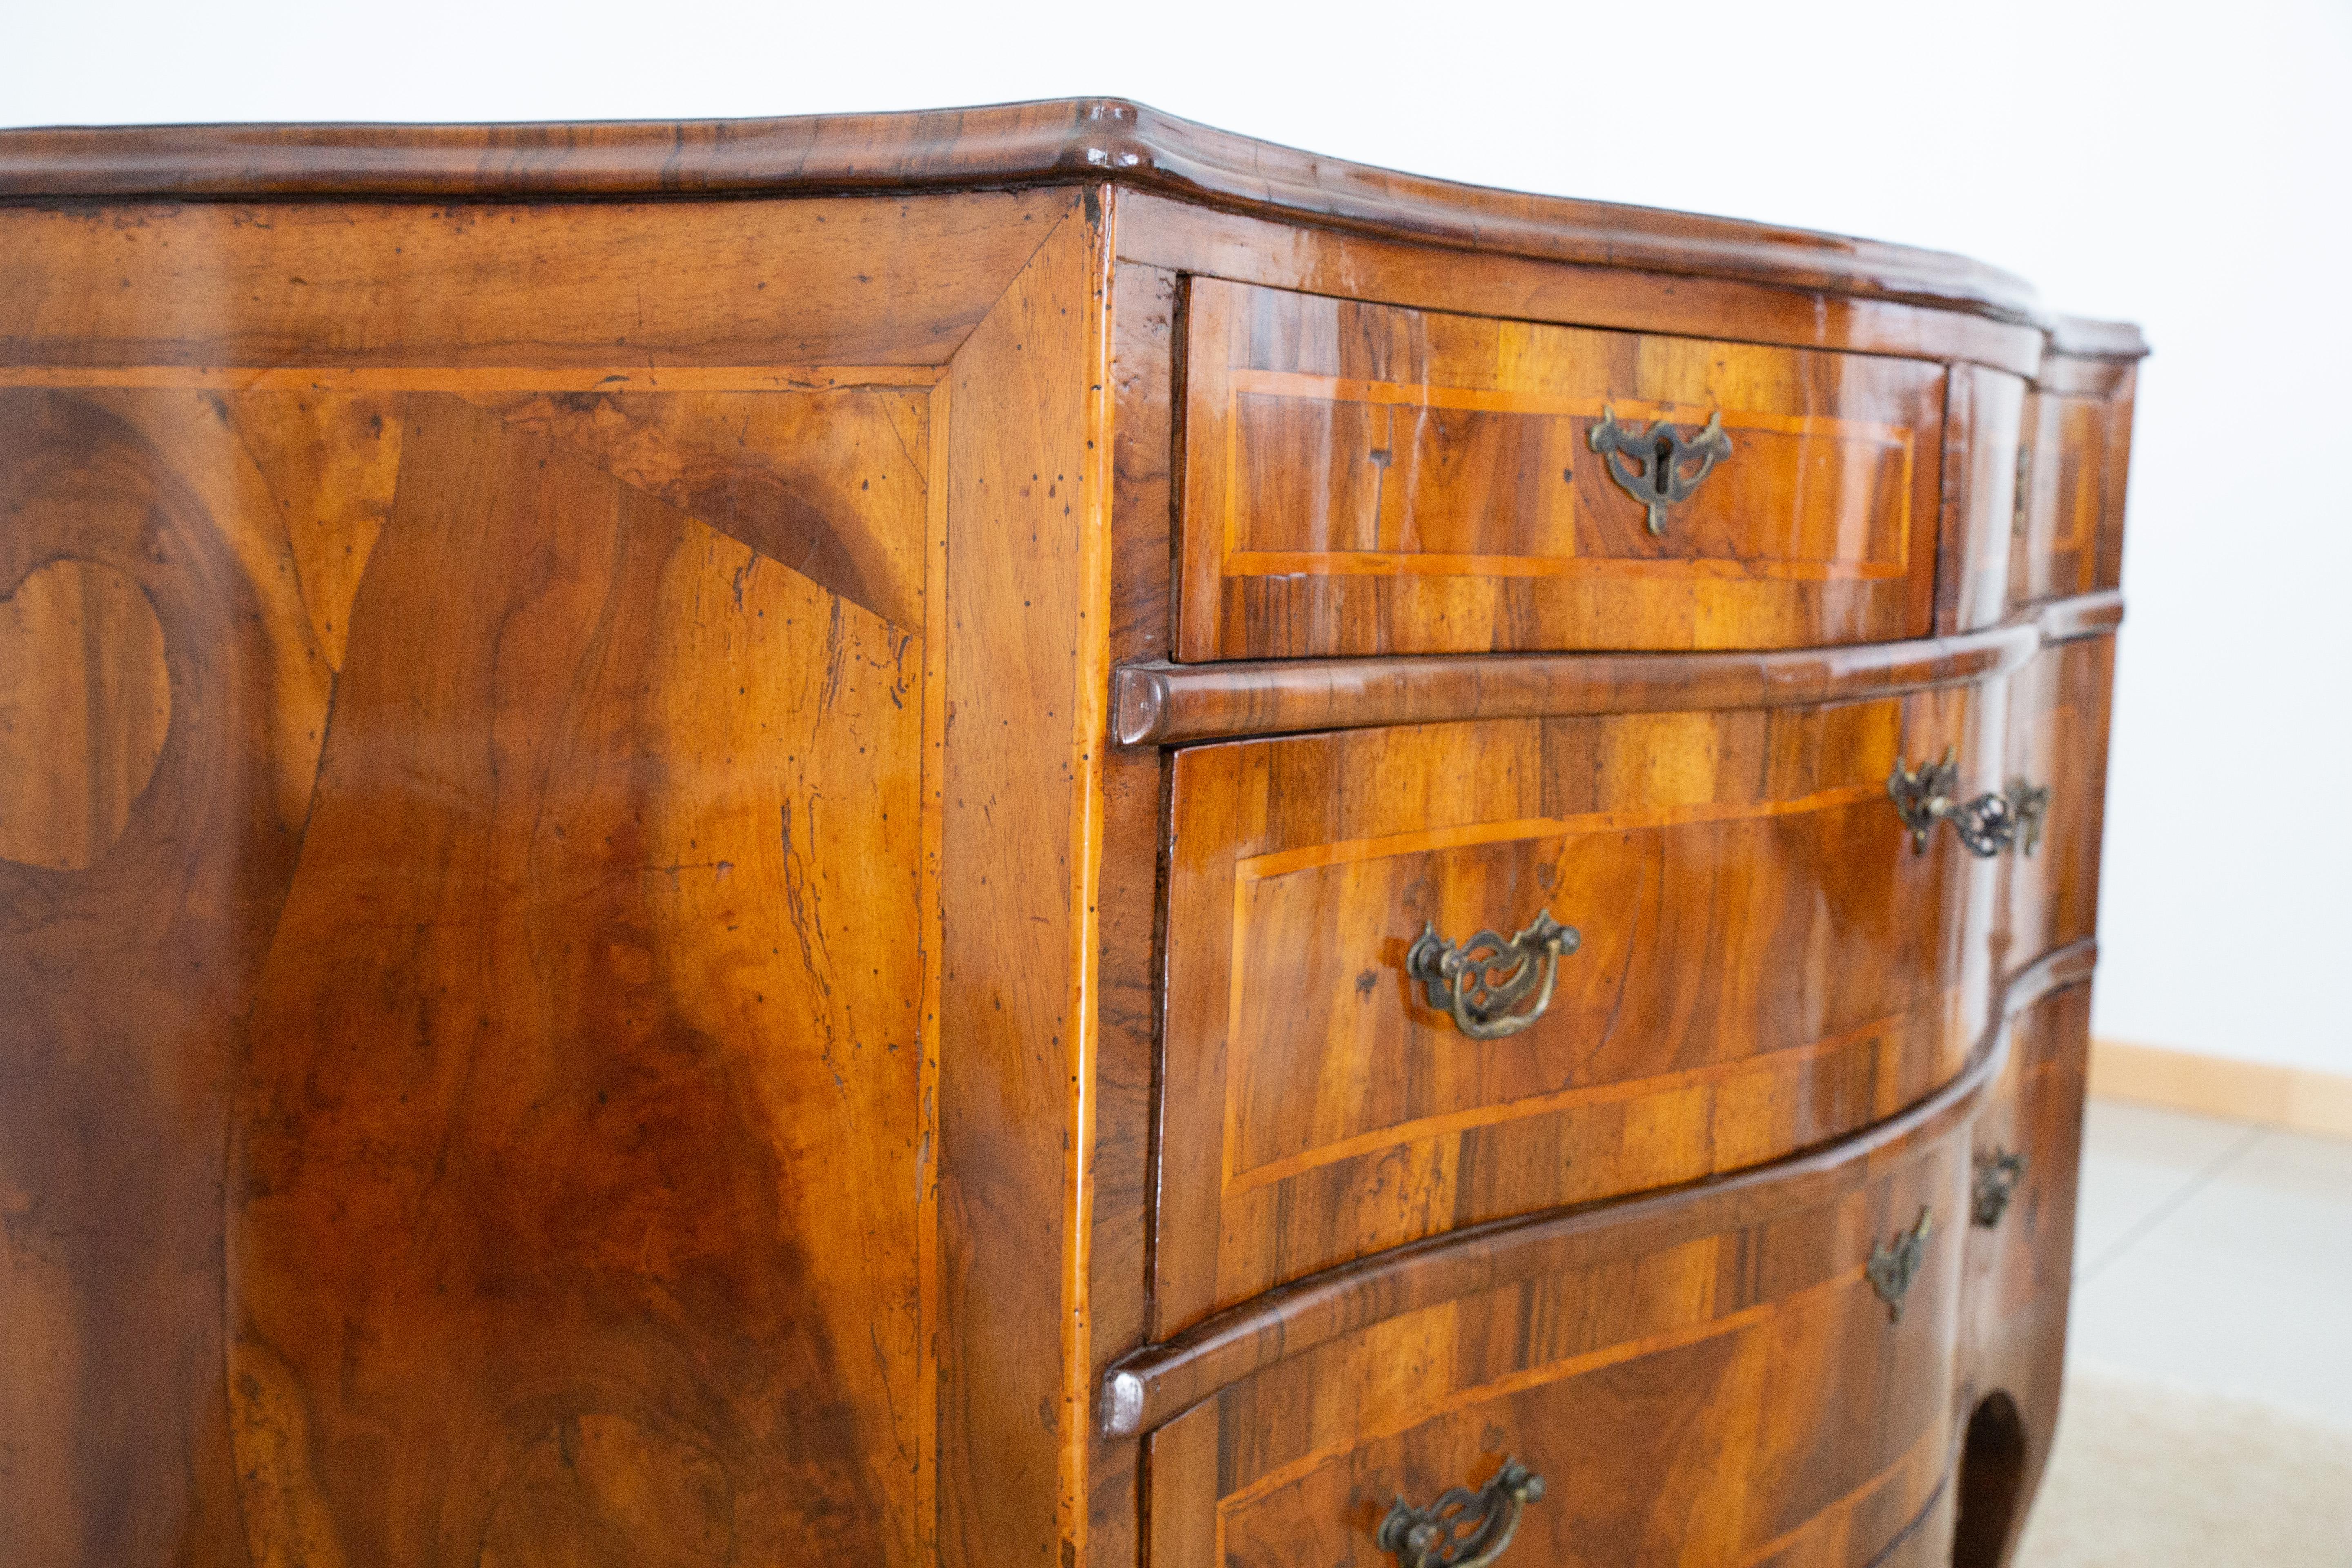 Venetian chest of drawers with a contoured shape both on the front and on the sides, veneered in walnut and walnut root on both the front and on the sides and threaded in maple wood.

Period: third quarter of the 18th century

Origin: